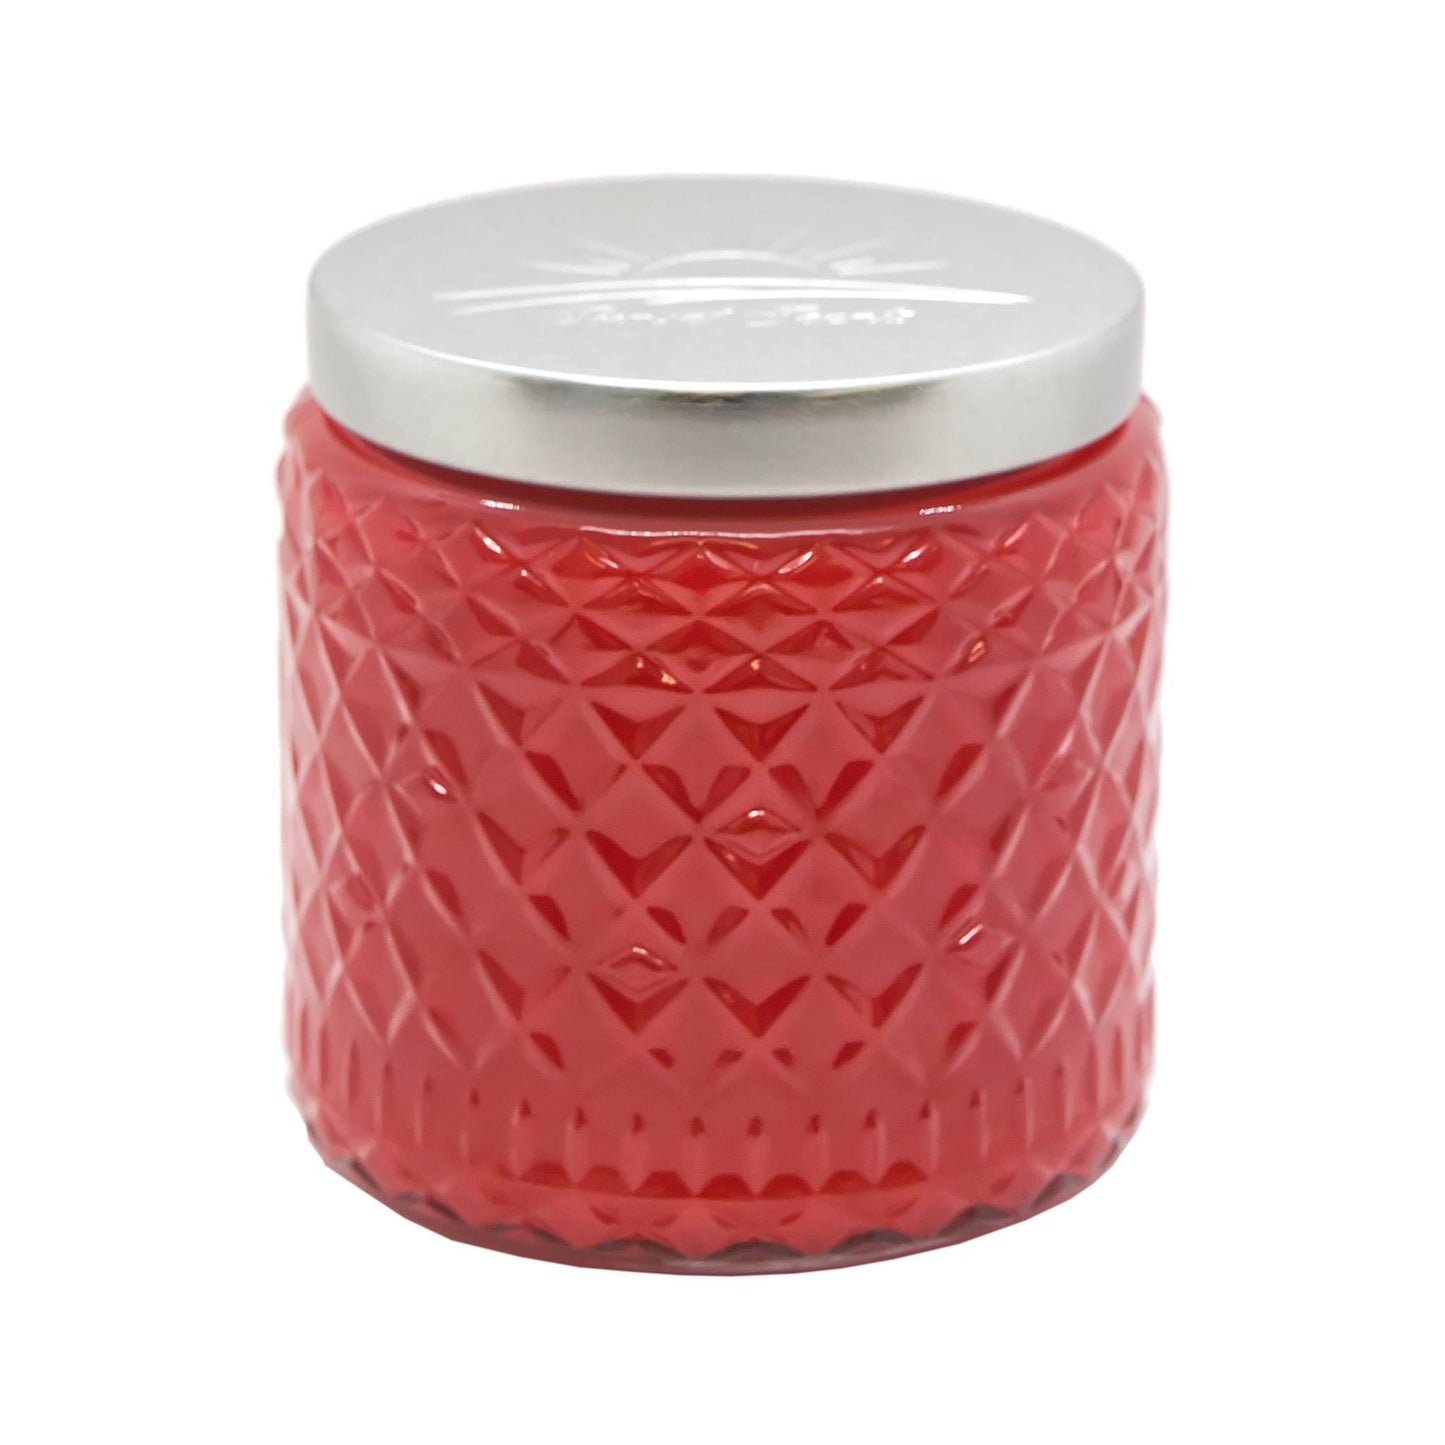 Juicy Watermelon Scented Candle